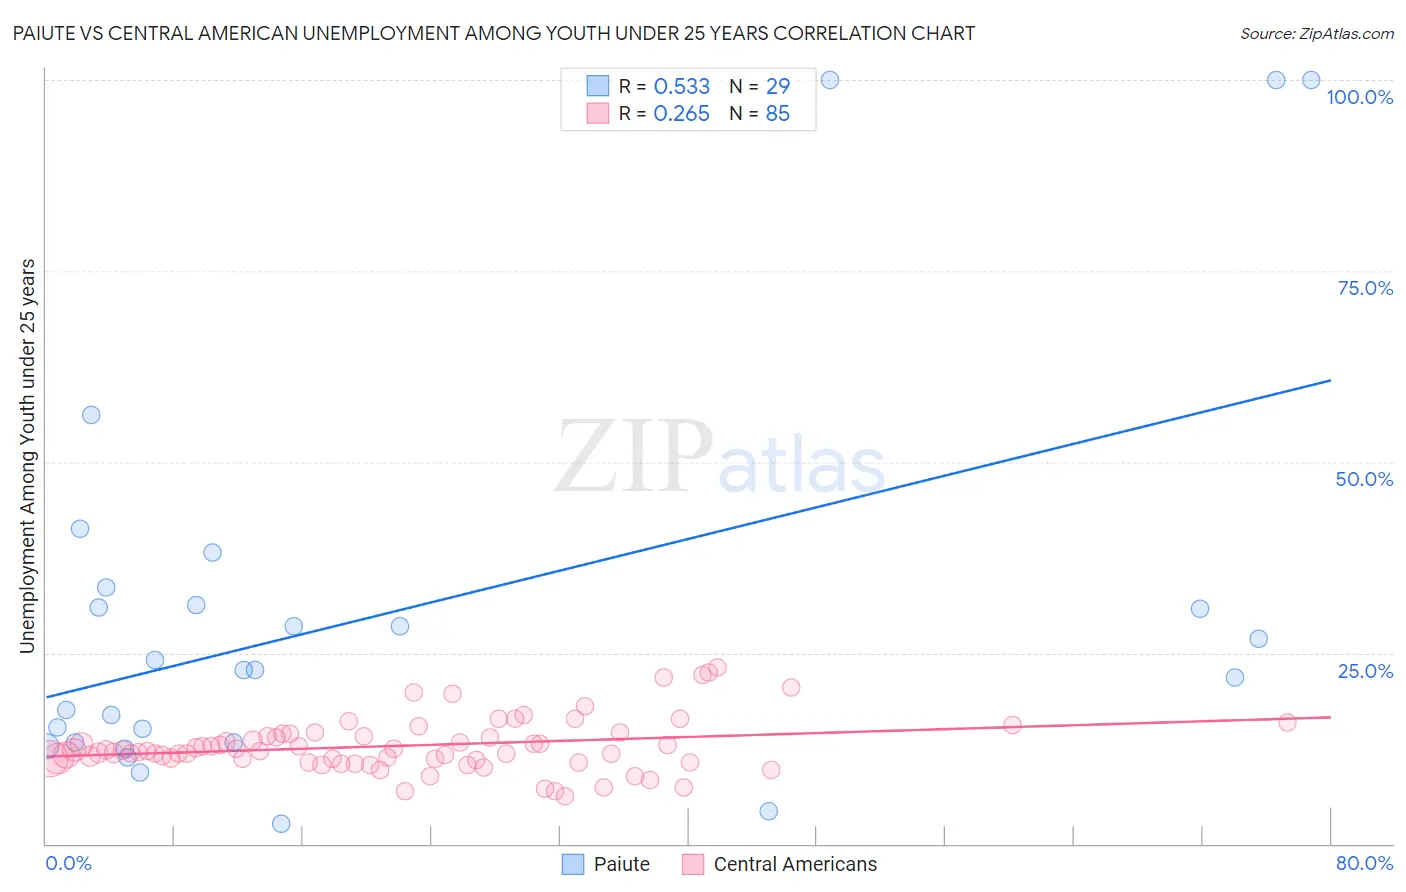 Paiute vs Central American Unemployment Among Youth under 25 years